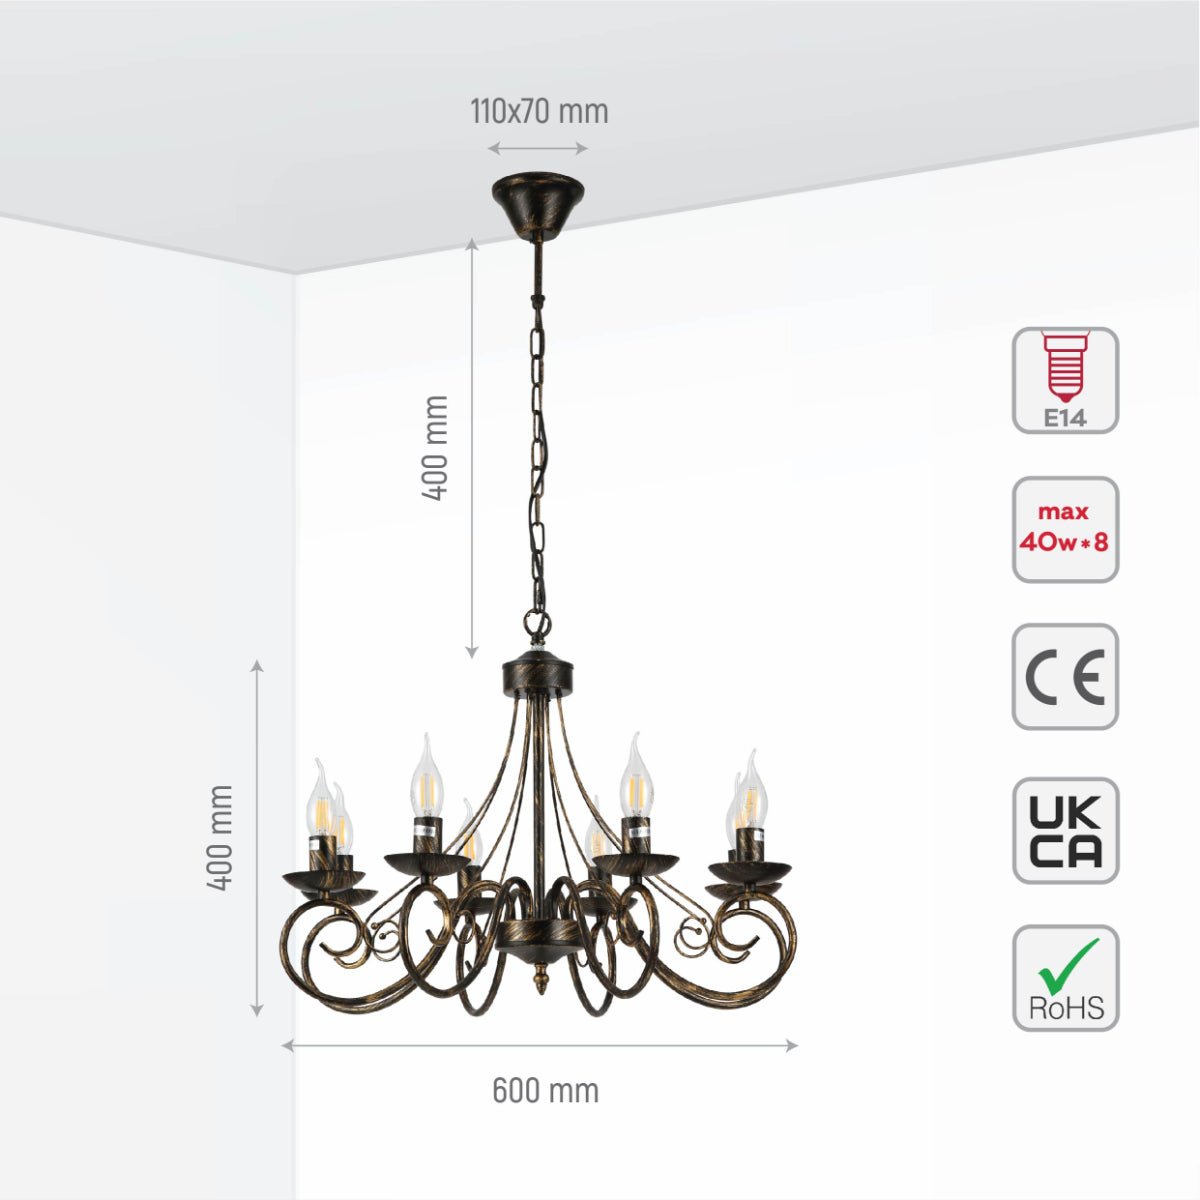 Size and specs of Candle Vintage Gold Patinated Black French Chandelier Ceiling Light 8xE14 | TEKLED 152-17616